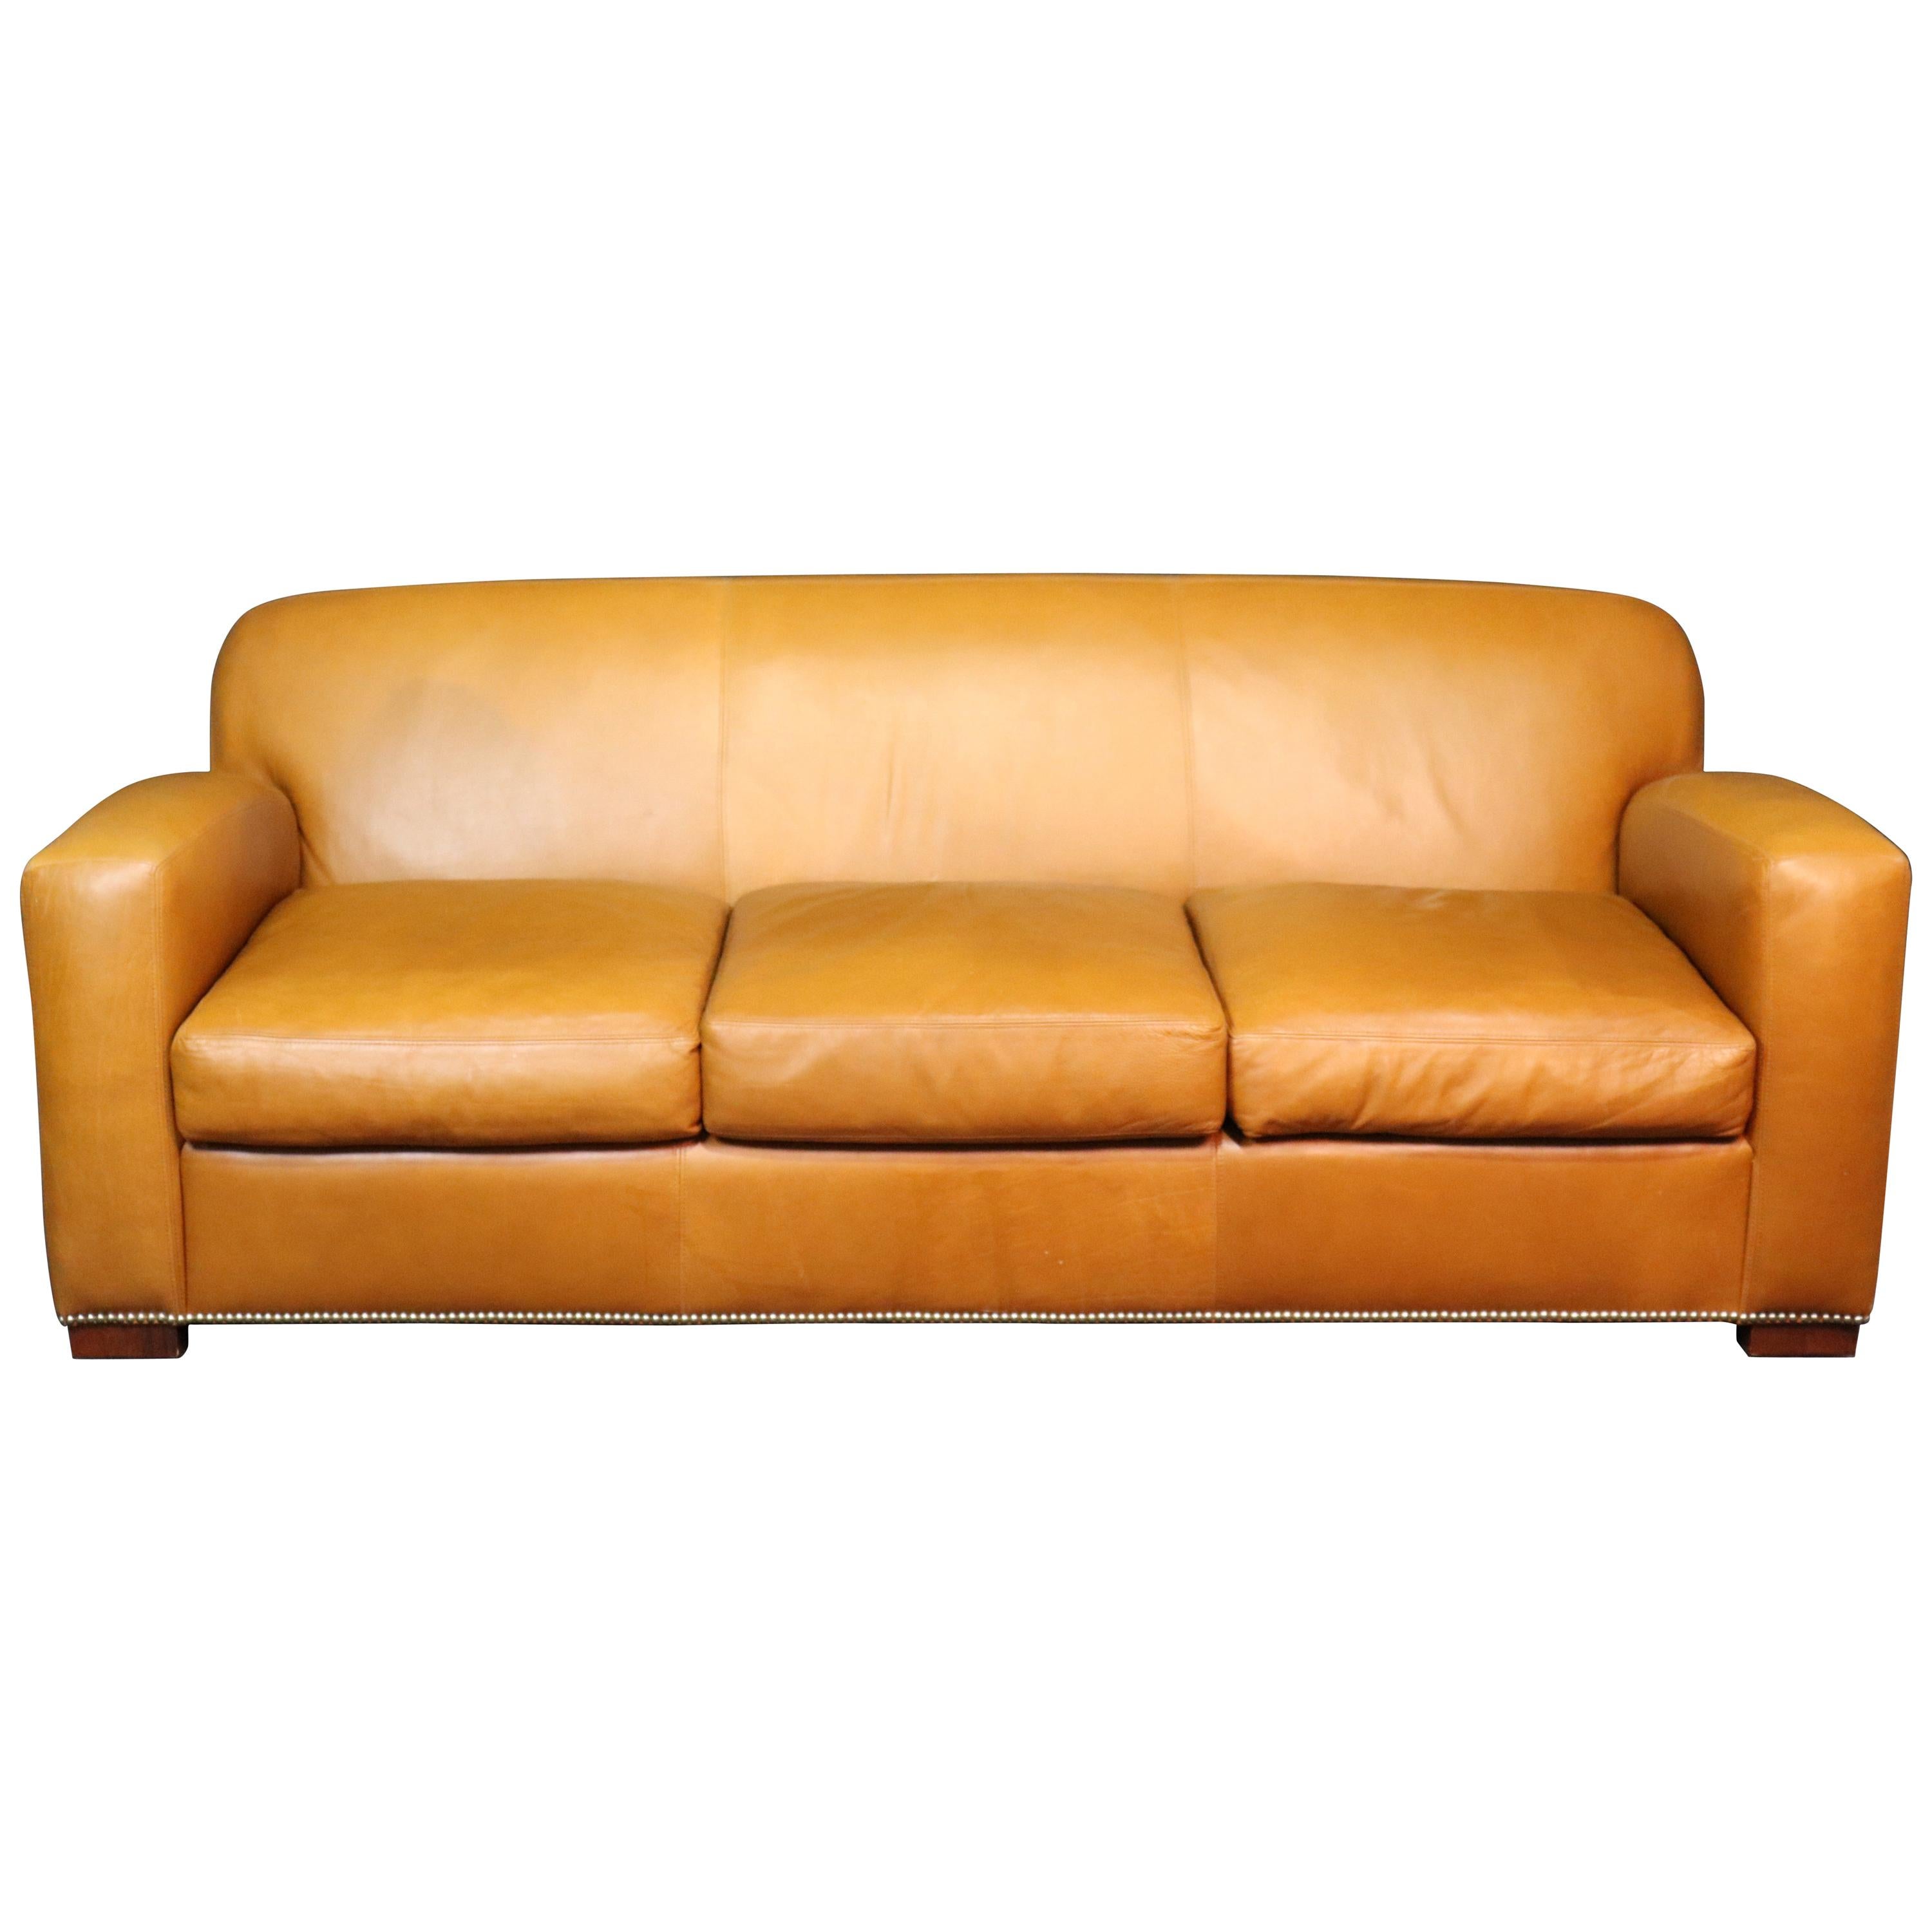 Large Ralph Lauren Art Deco Style Sofa in Apricot Leather